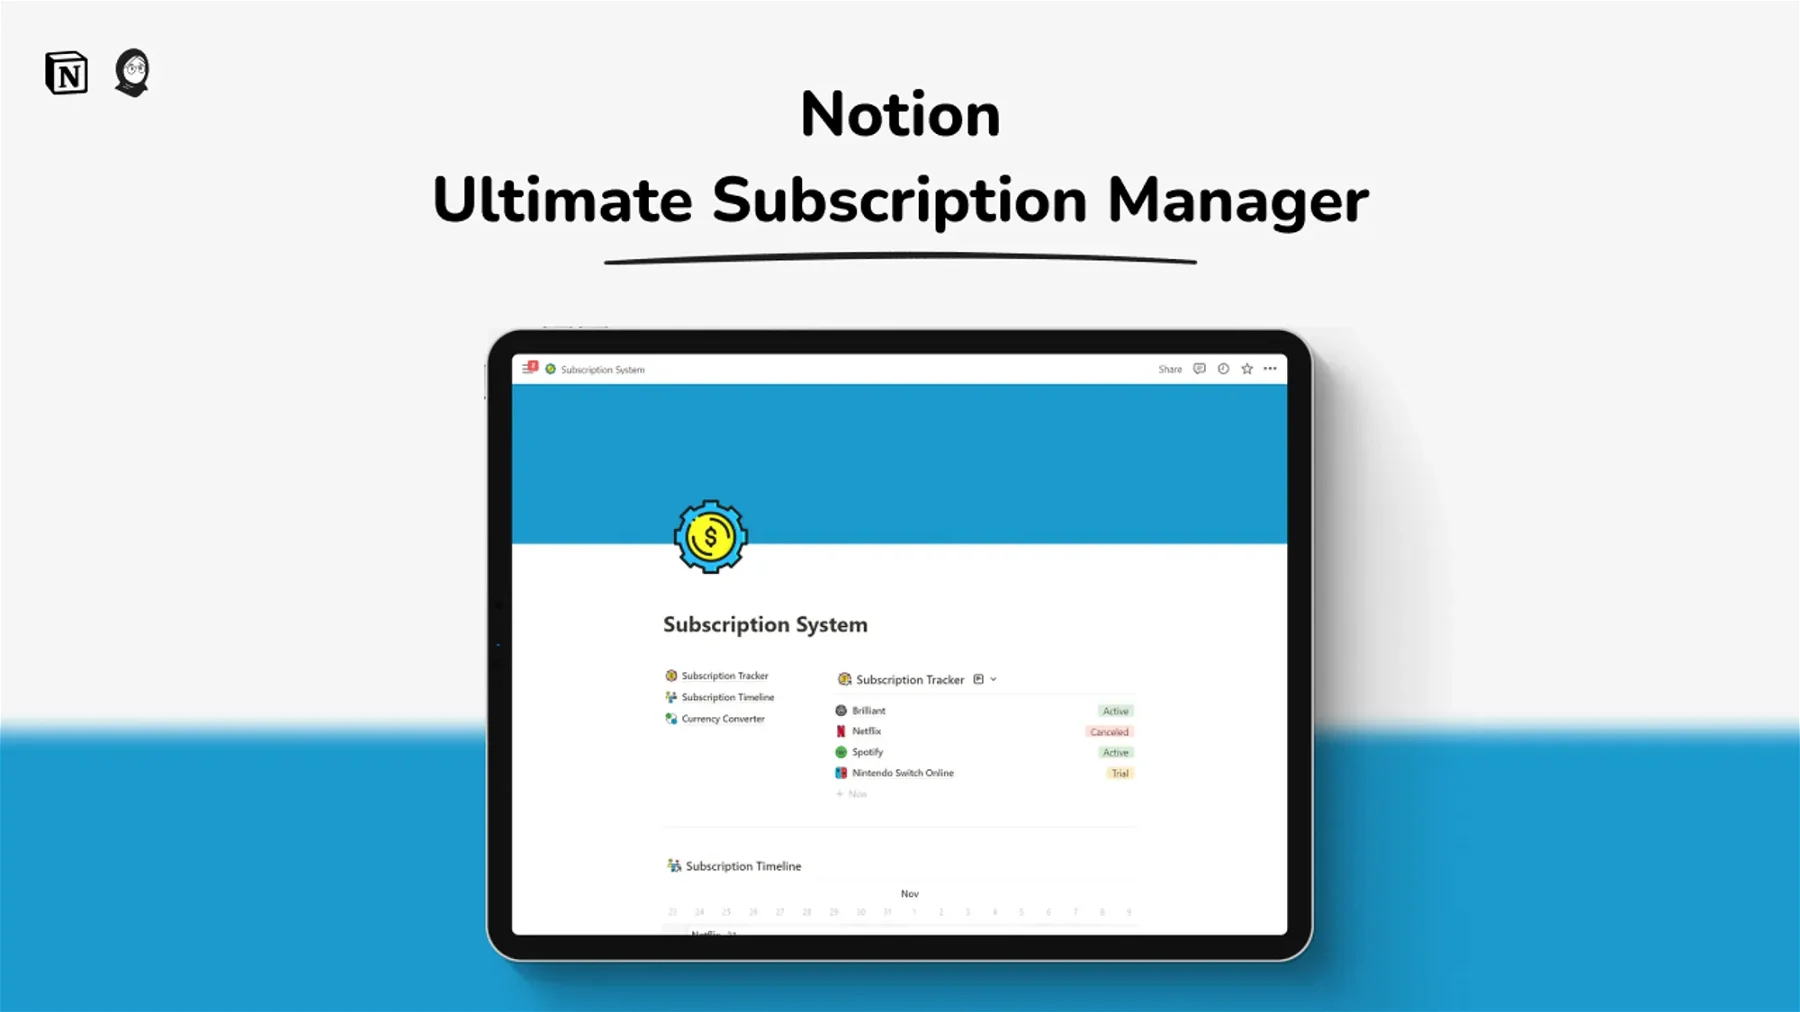 Notion Ultimate Subscription Manager